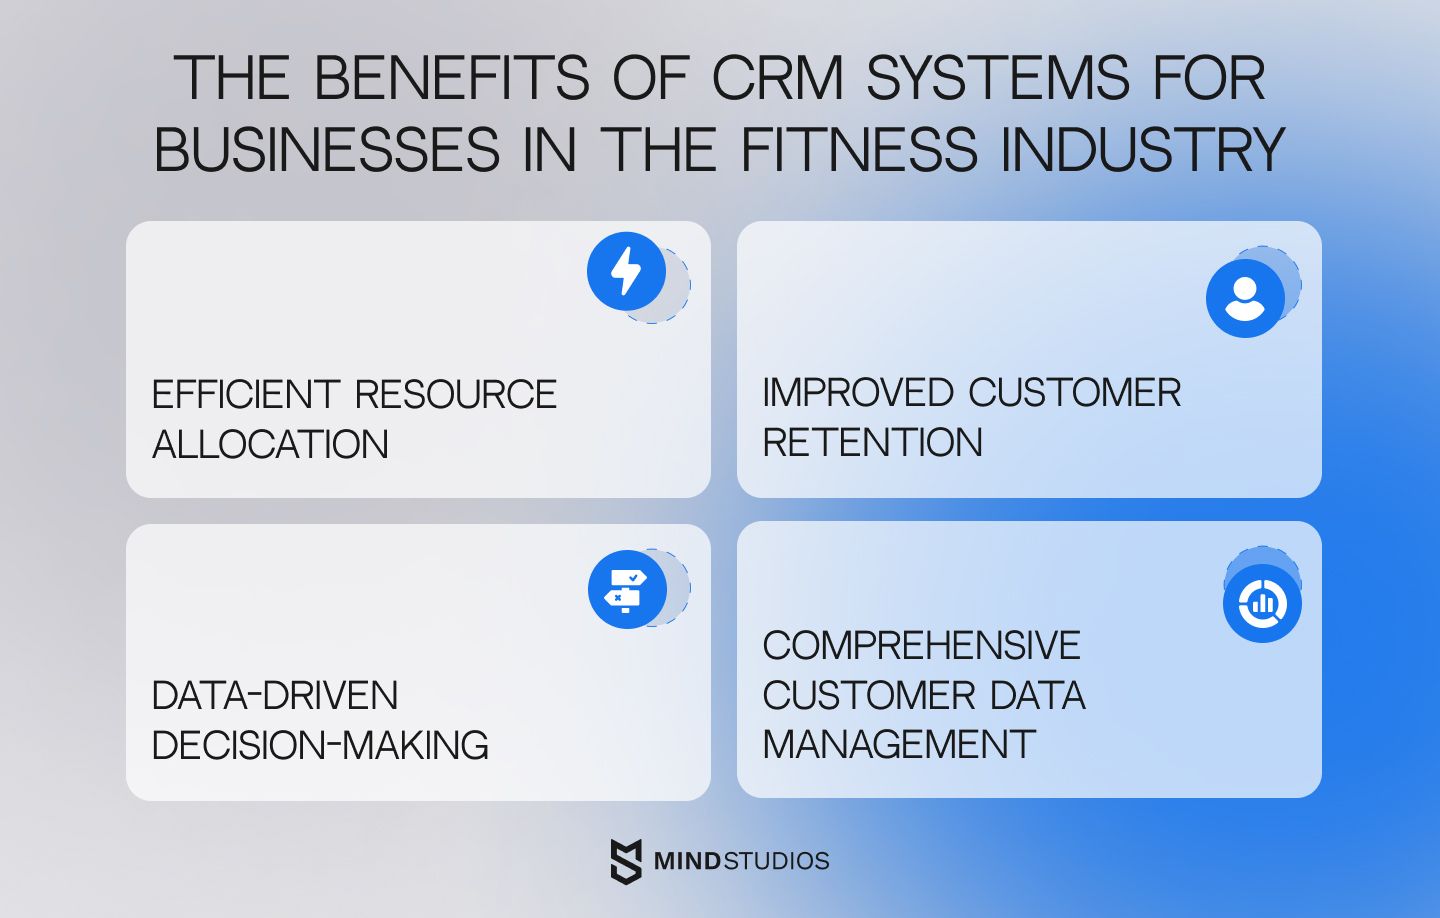 The benefits of CRM systems for businesses in the fitness industry